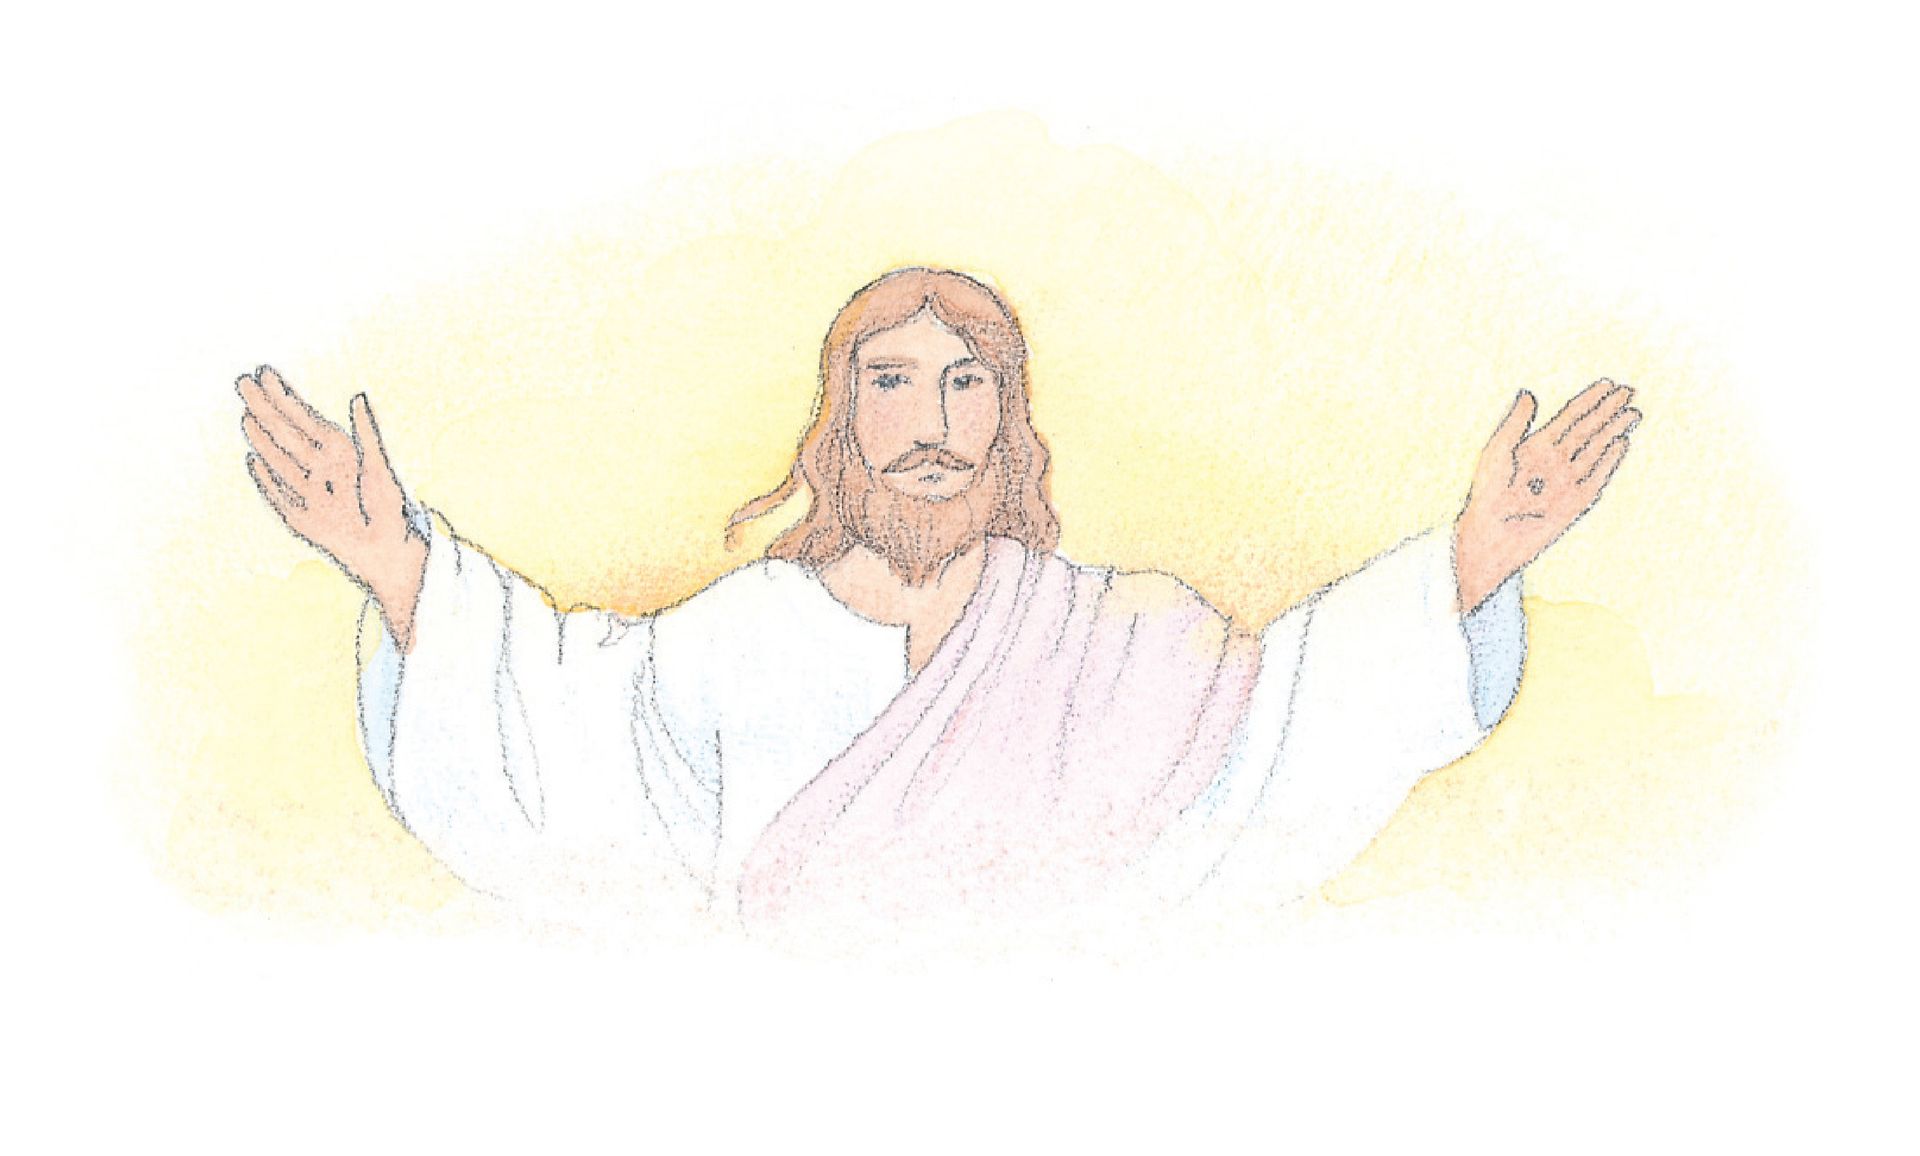 Jesus Christ with His arms outstretched. From the Children’s Songbook, page 76, “This Is My Beloved Son”; watercolor illustration by Phyllis Luch.